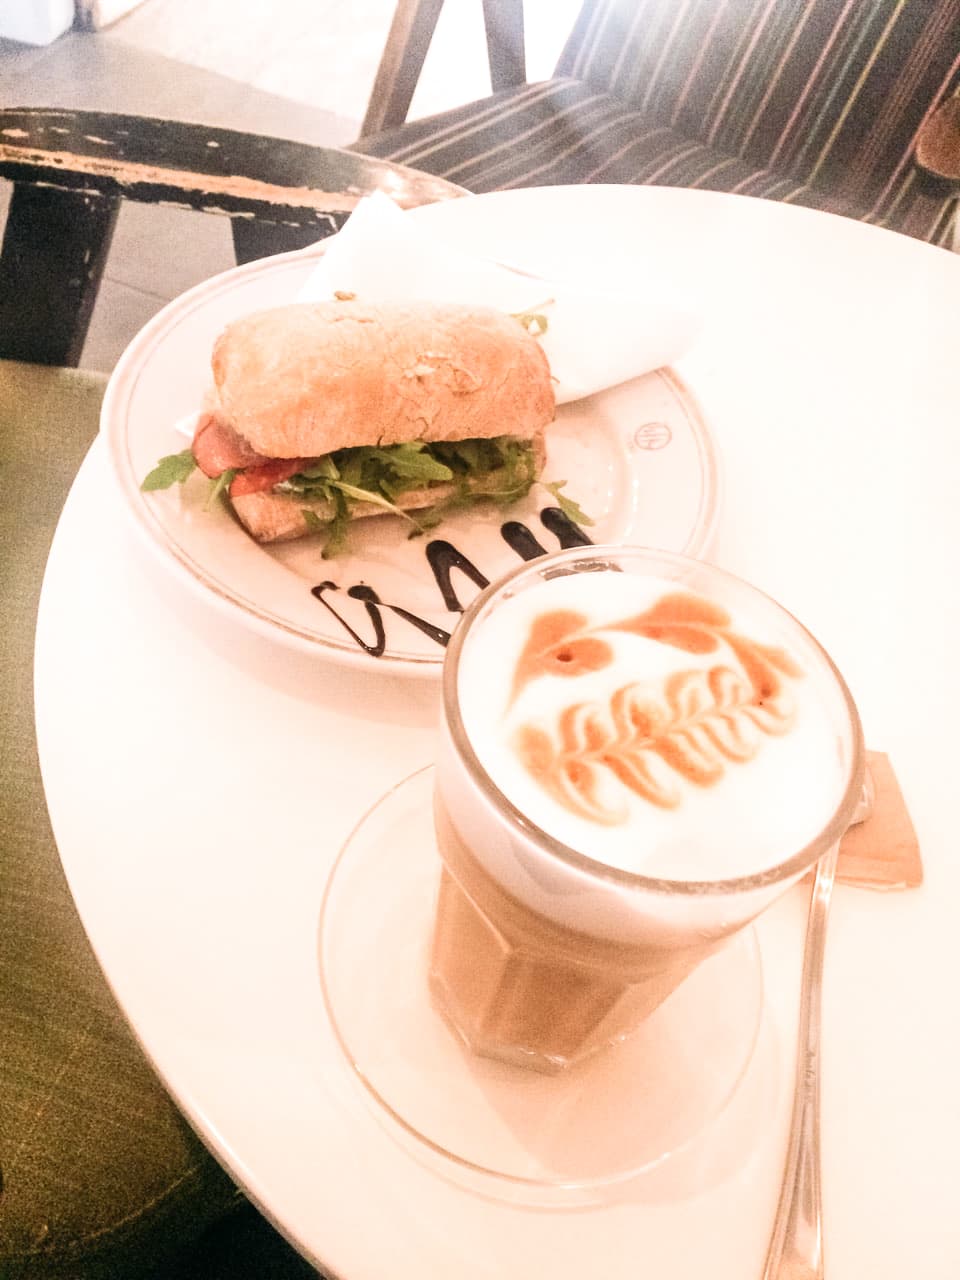 A sandwich and an amaretto latte placed on a table